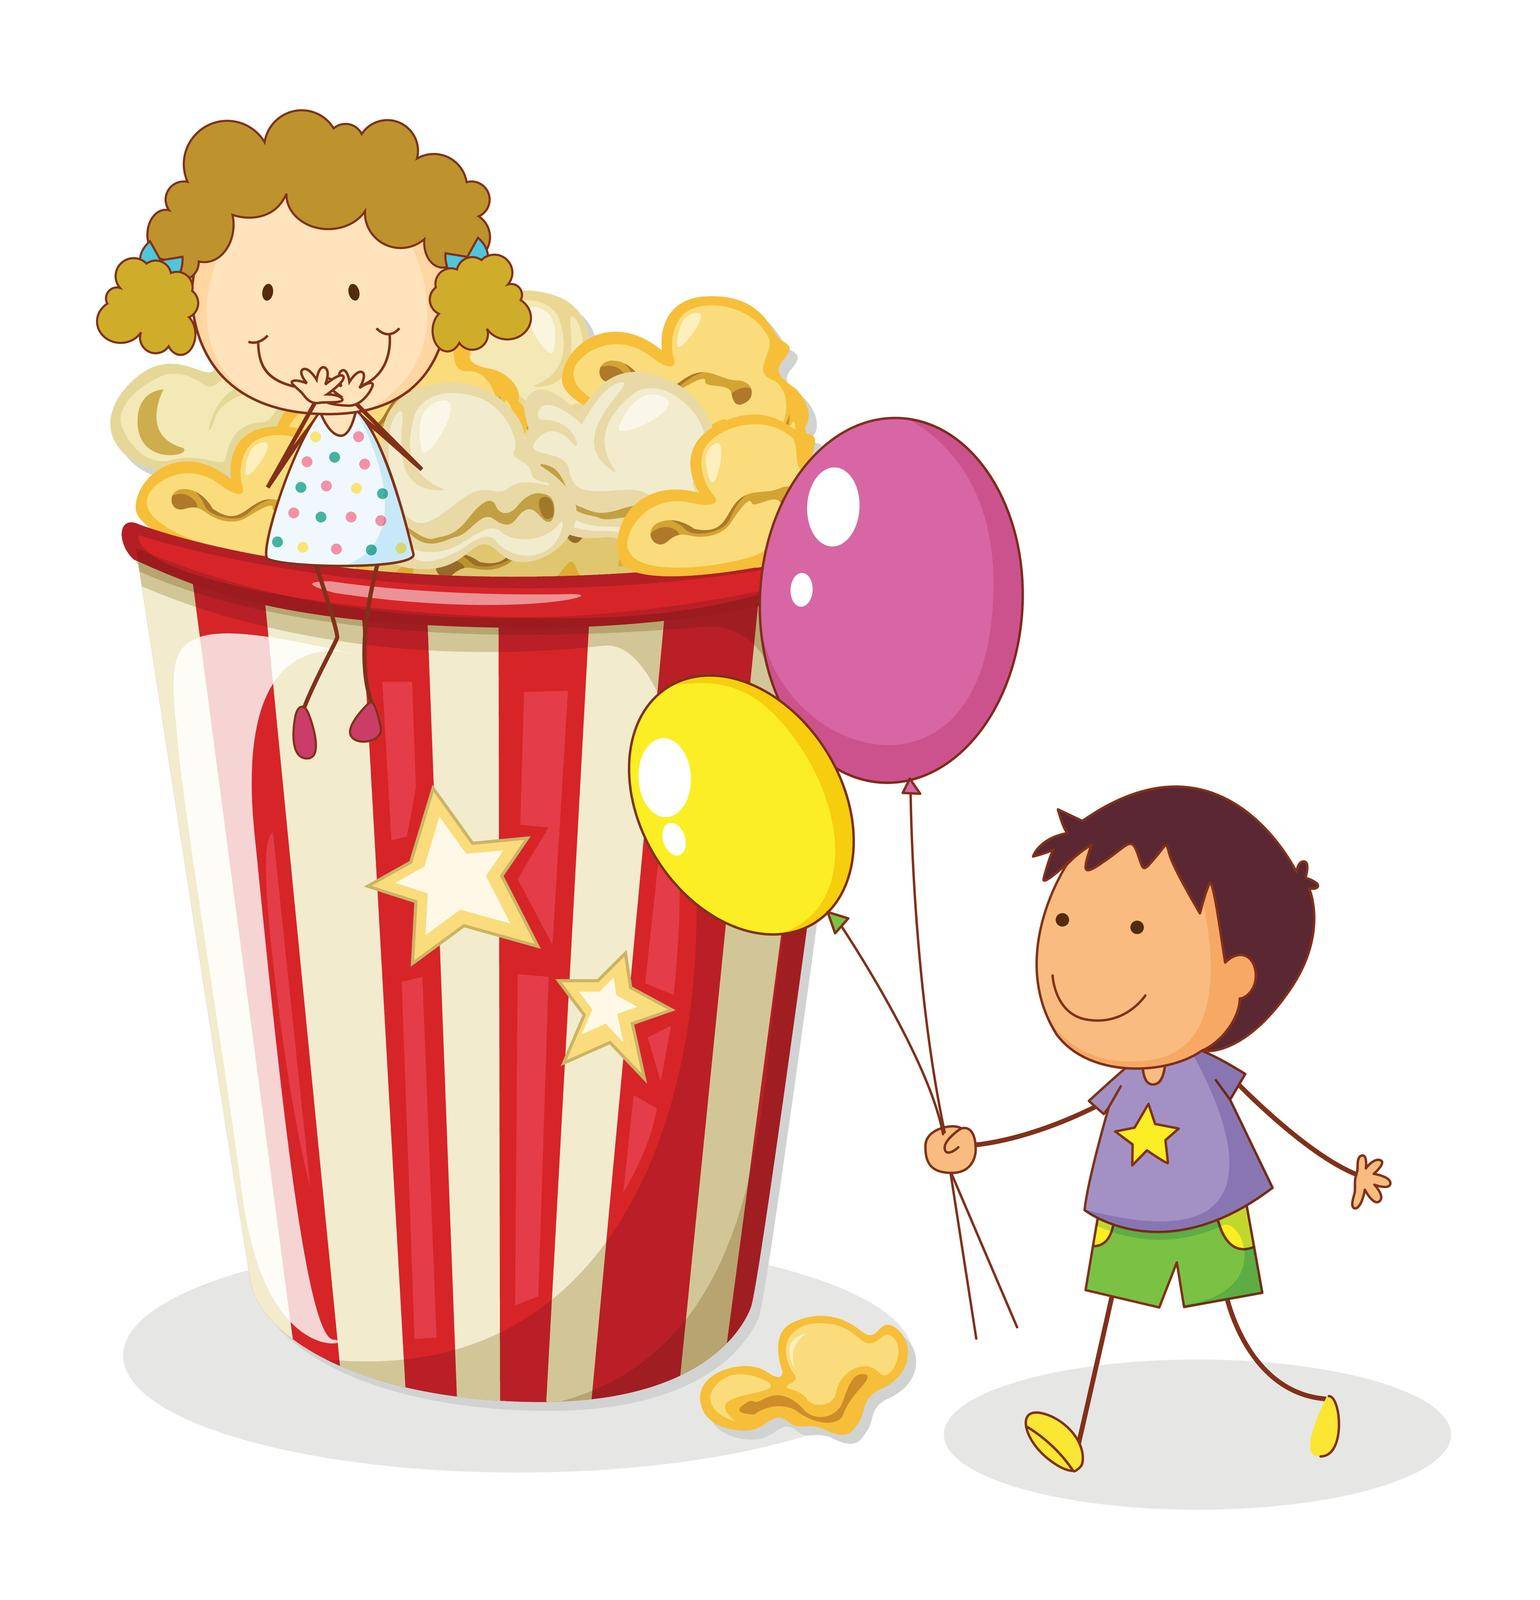 kids and popcorn by iimages